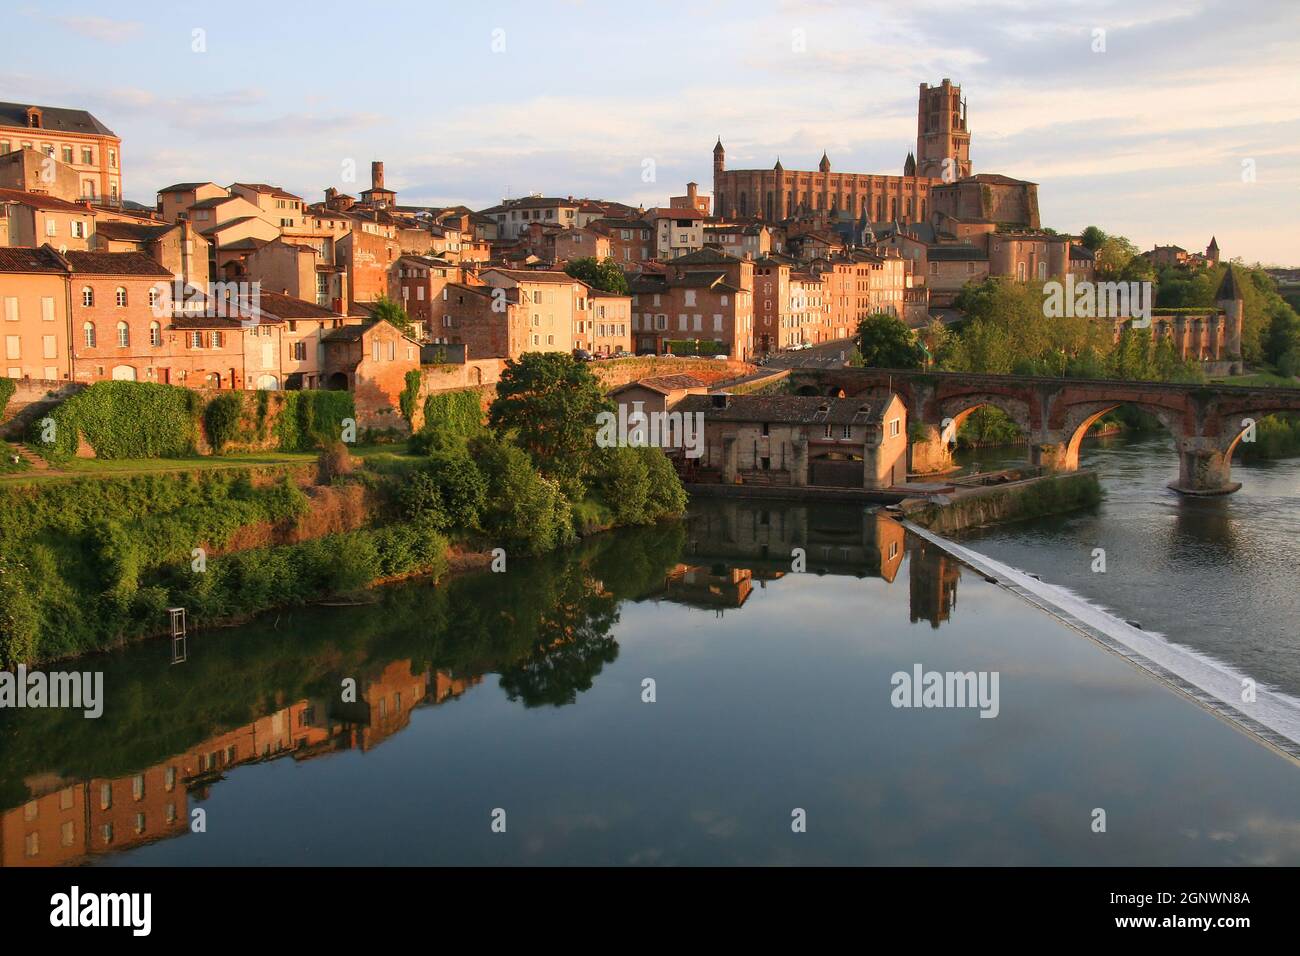 Cathedral St Cecile and reflections of the town in the River Tarn glowing red soon before sunset in Albi, Tarn, Occitanie, France Stock Photo